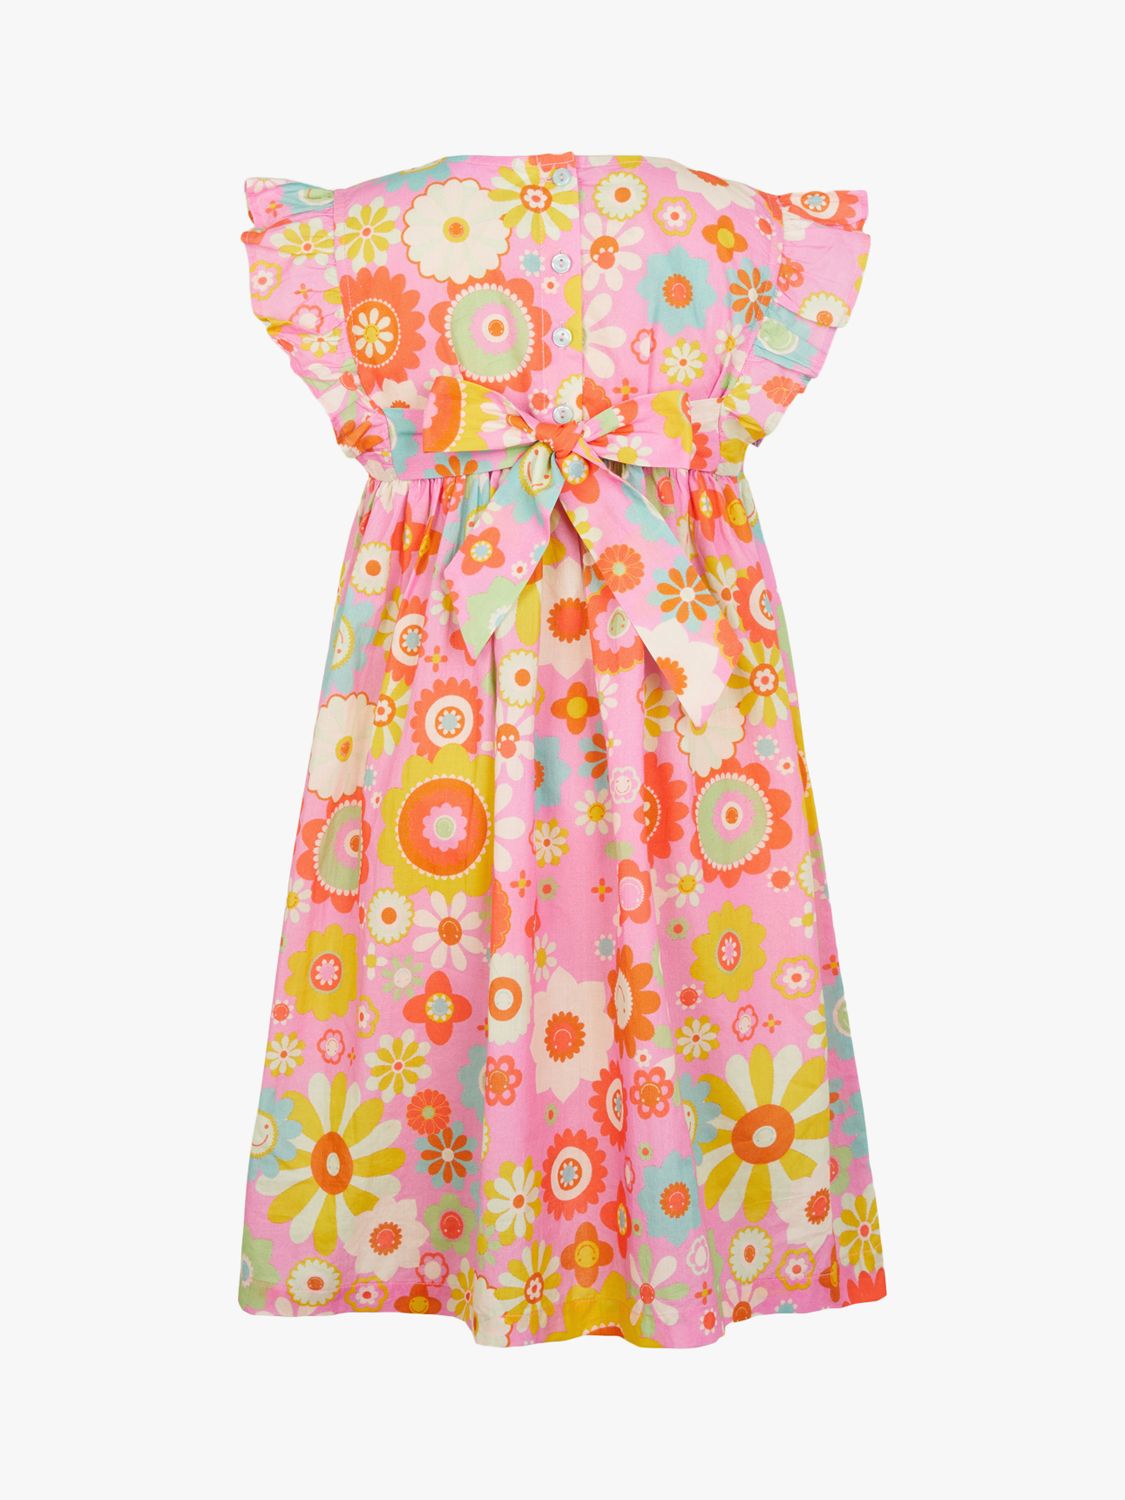 Angels by Accessorize Kids' Boho Floral Print Short Sleeve Dress, Pink/Multi, 3-4 years